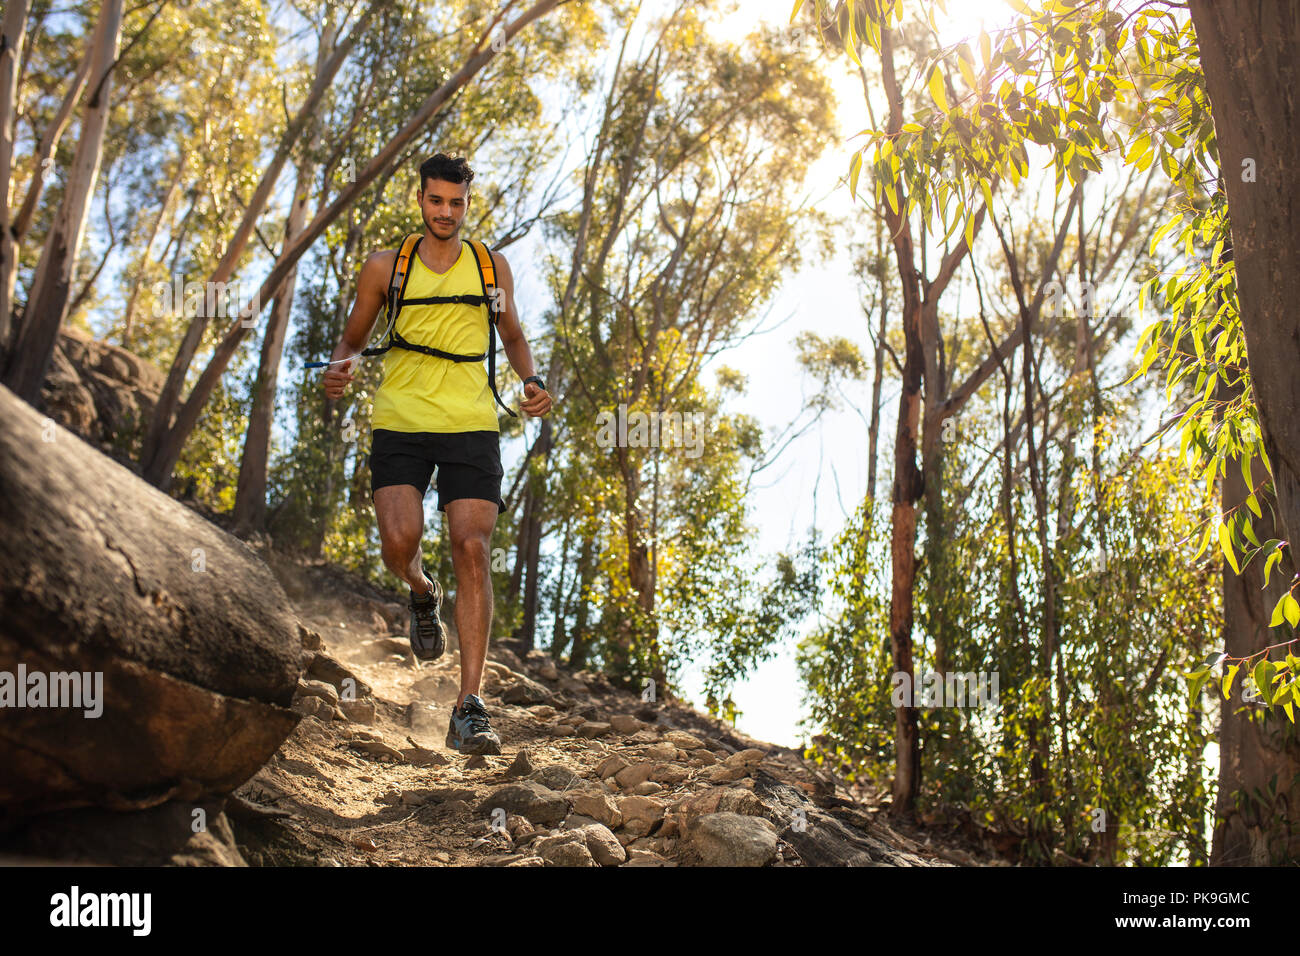 Fit young man in sportswear wearing hydration pack running outdoors over rocky trail on the hill. Mountain trail runner practicing on dirt path. Stock Photo